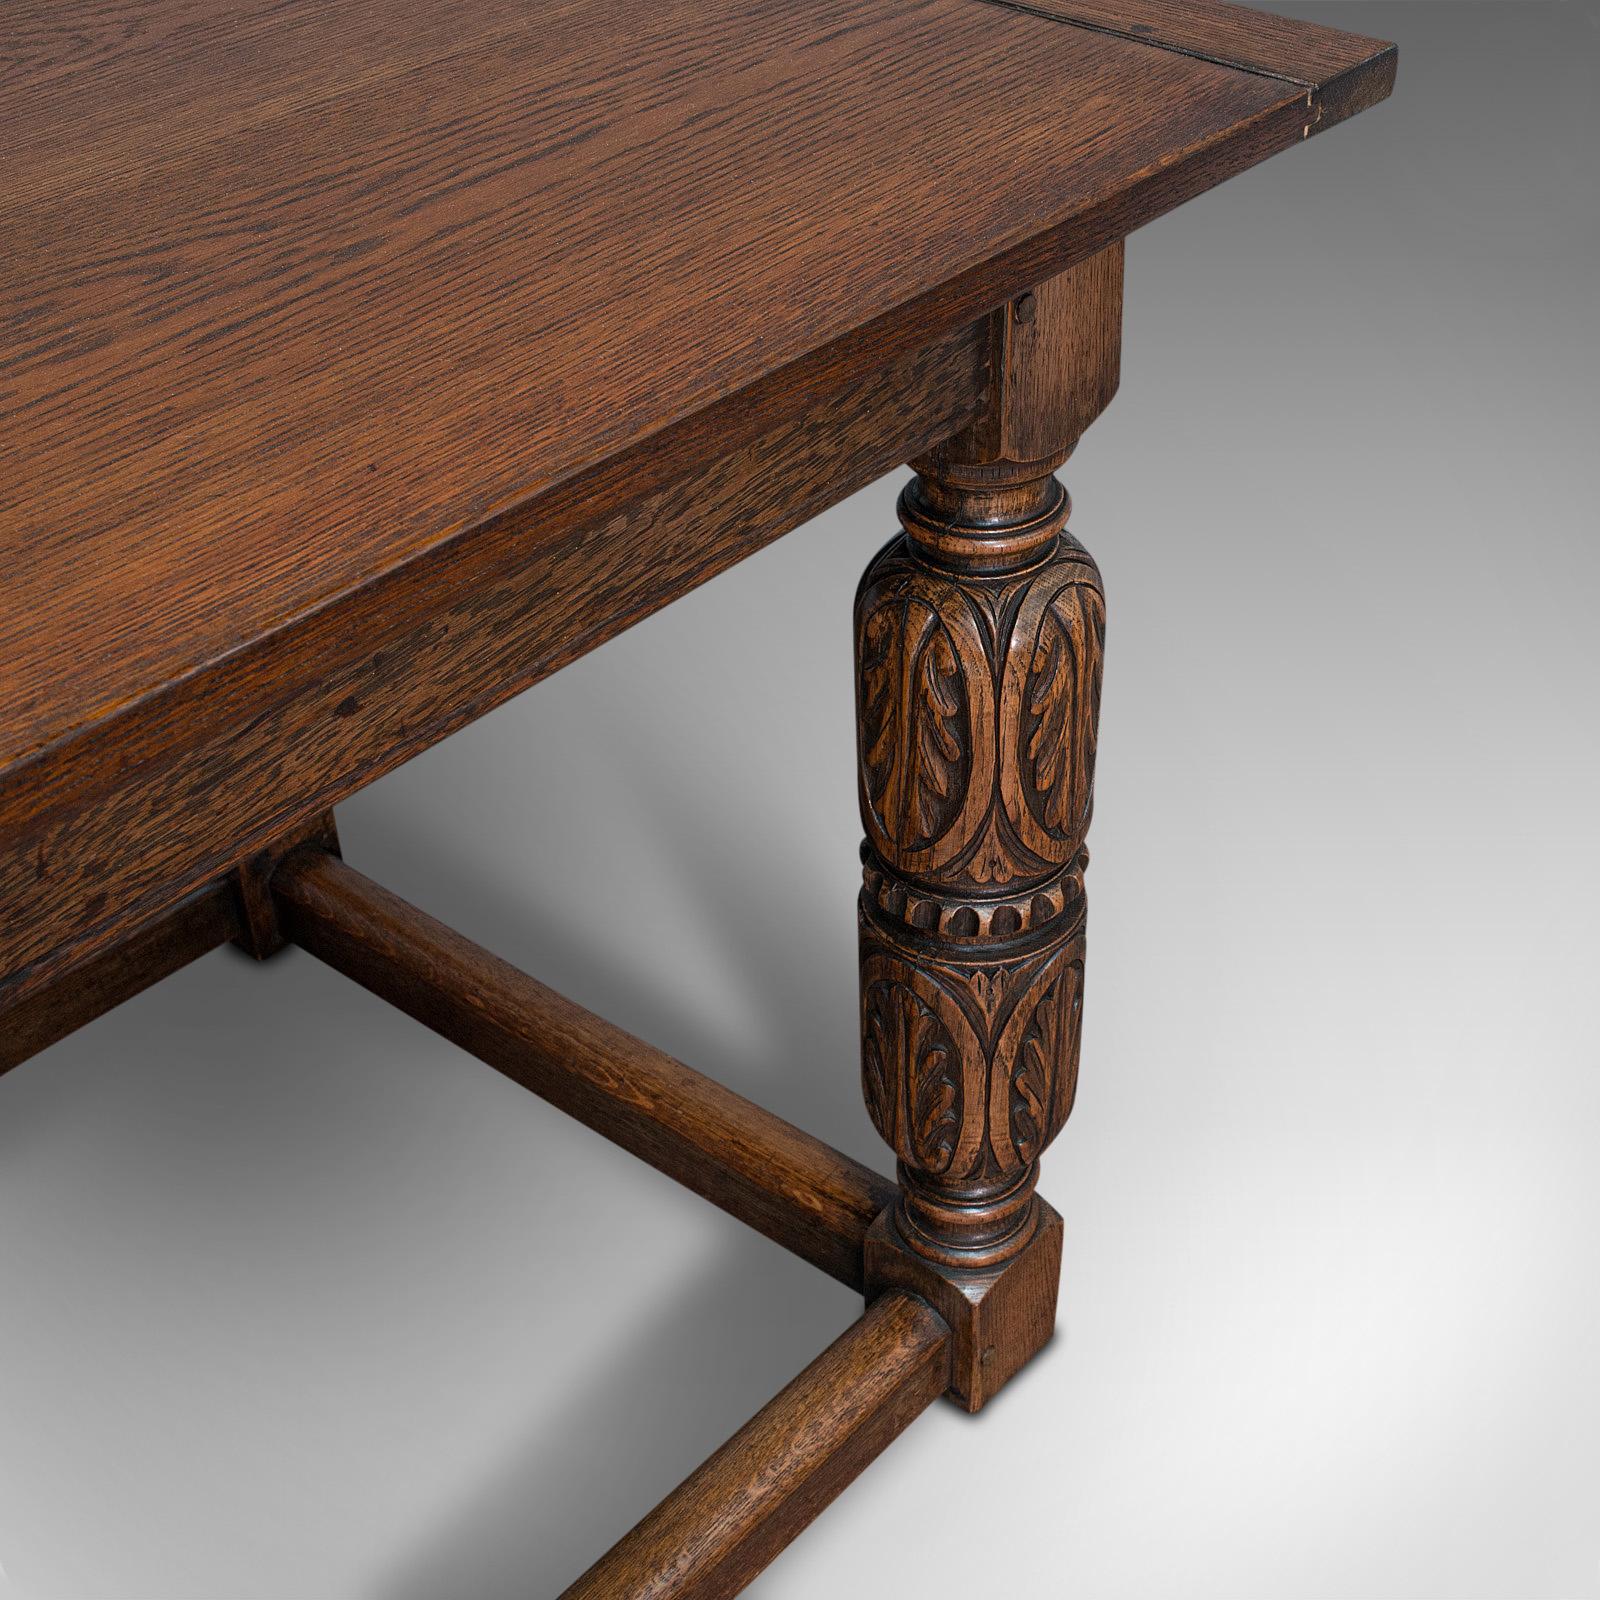 Antique Refectory Table, English, Oak, Dining, Jacobean Revival, Edwardian, 1910 For Sale 2